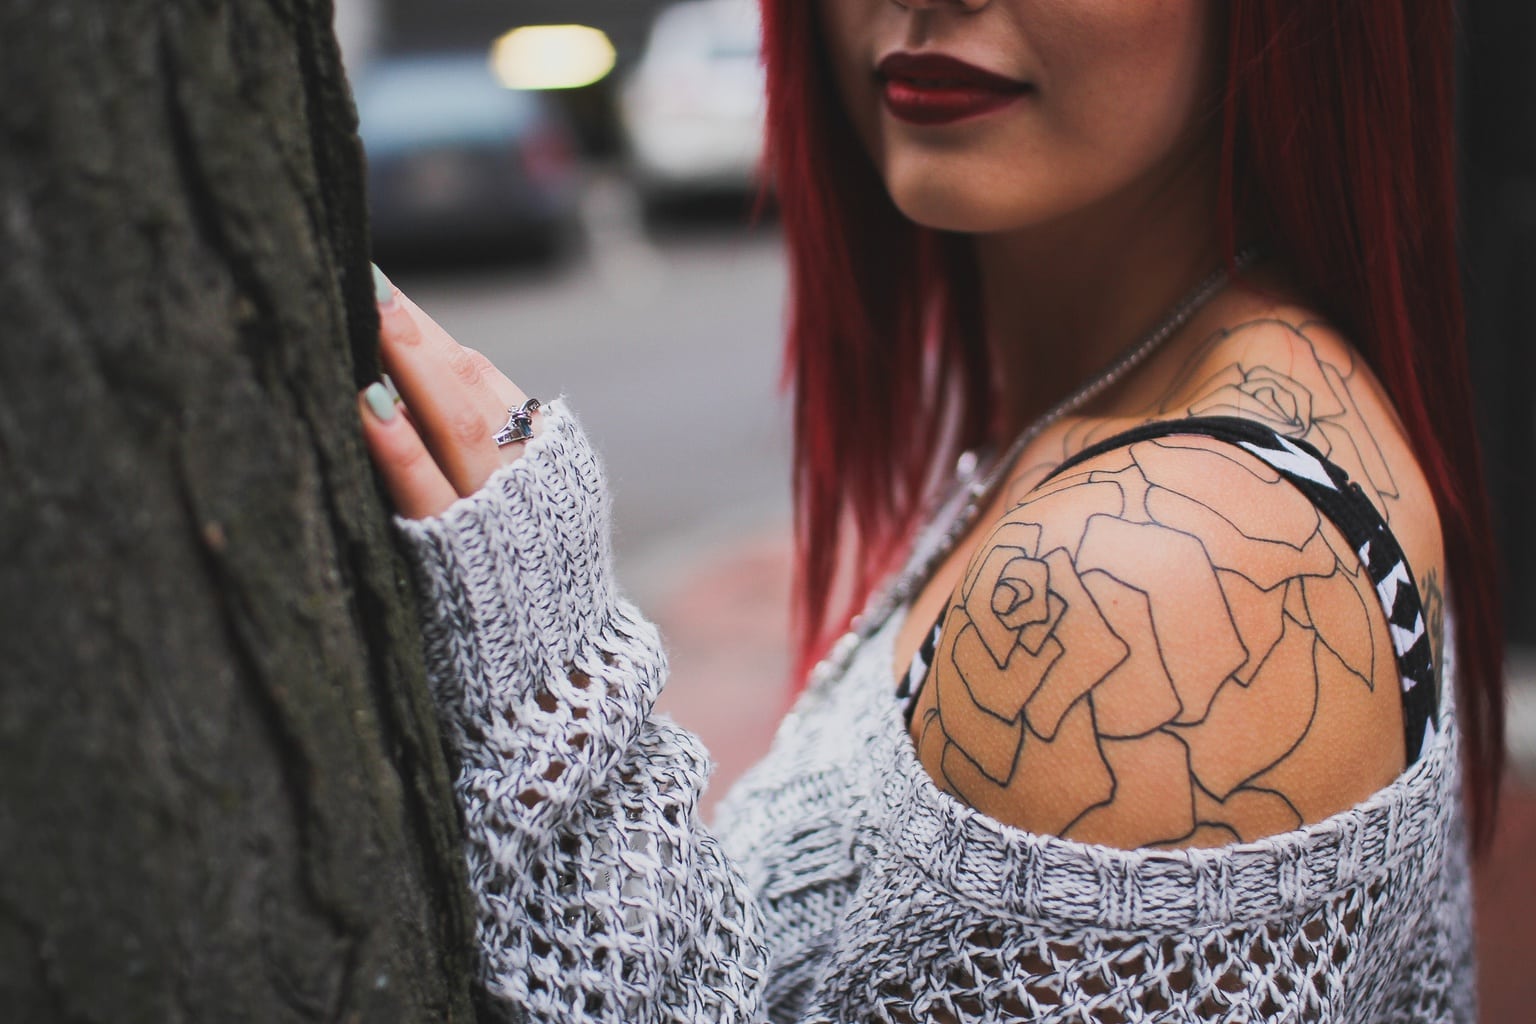 Tattoos and Fashion 101: Clothes to Wear with Tattoos